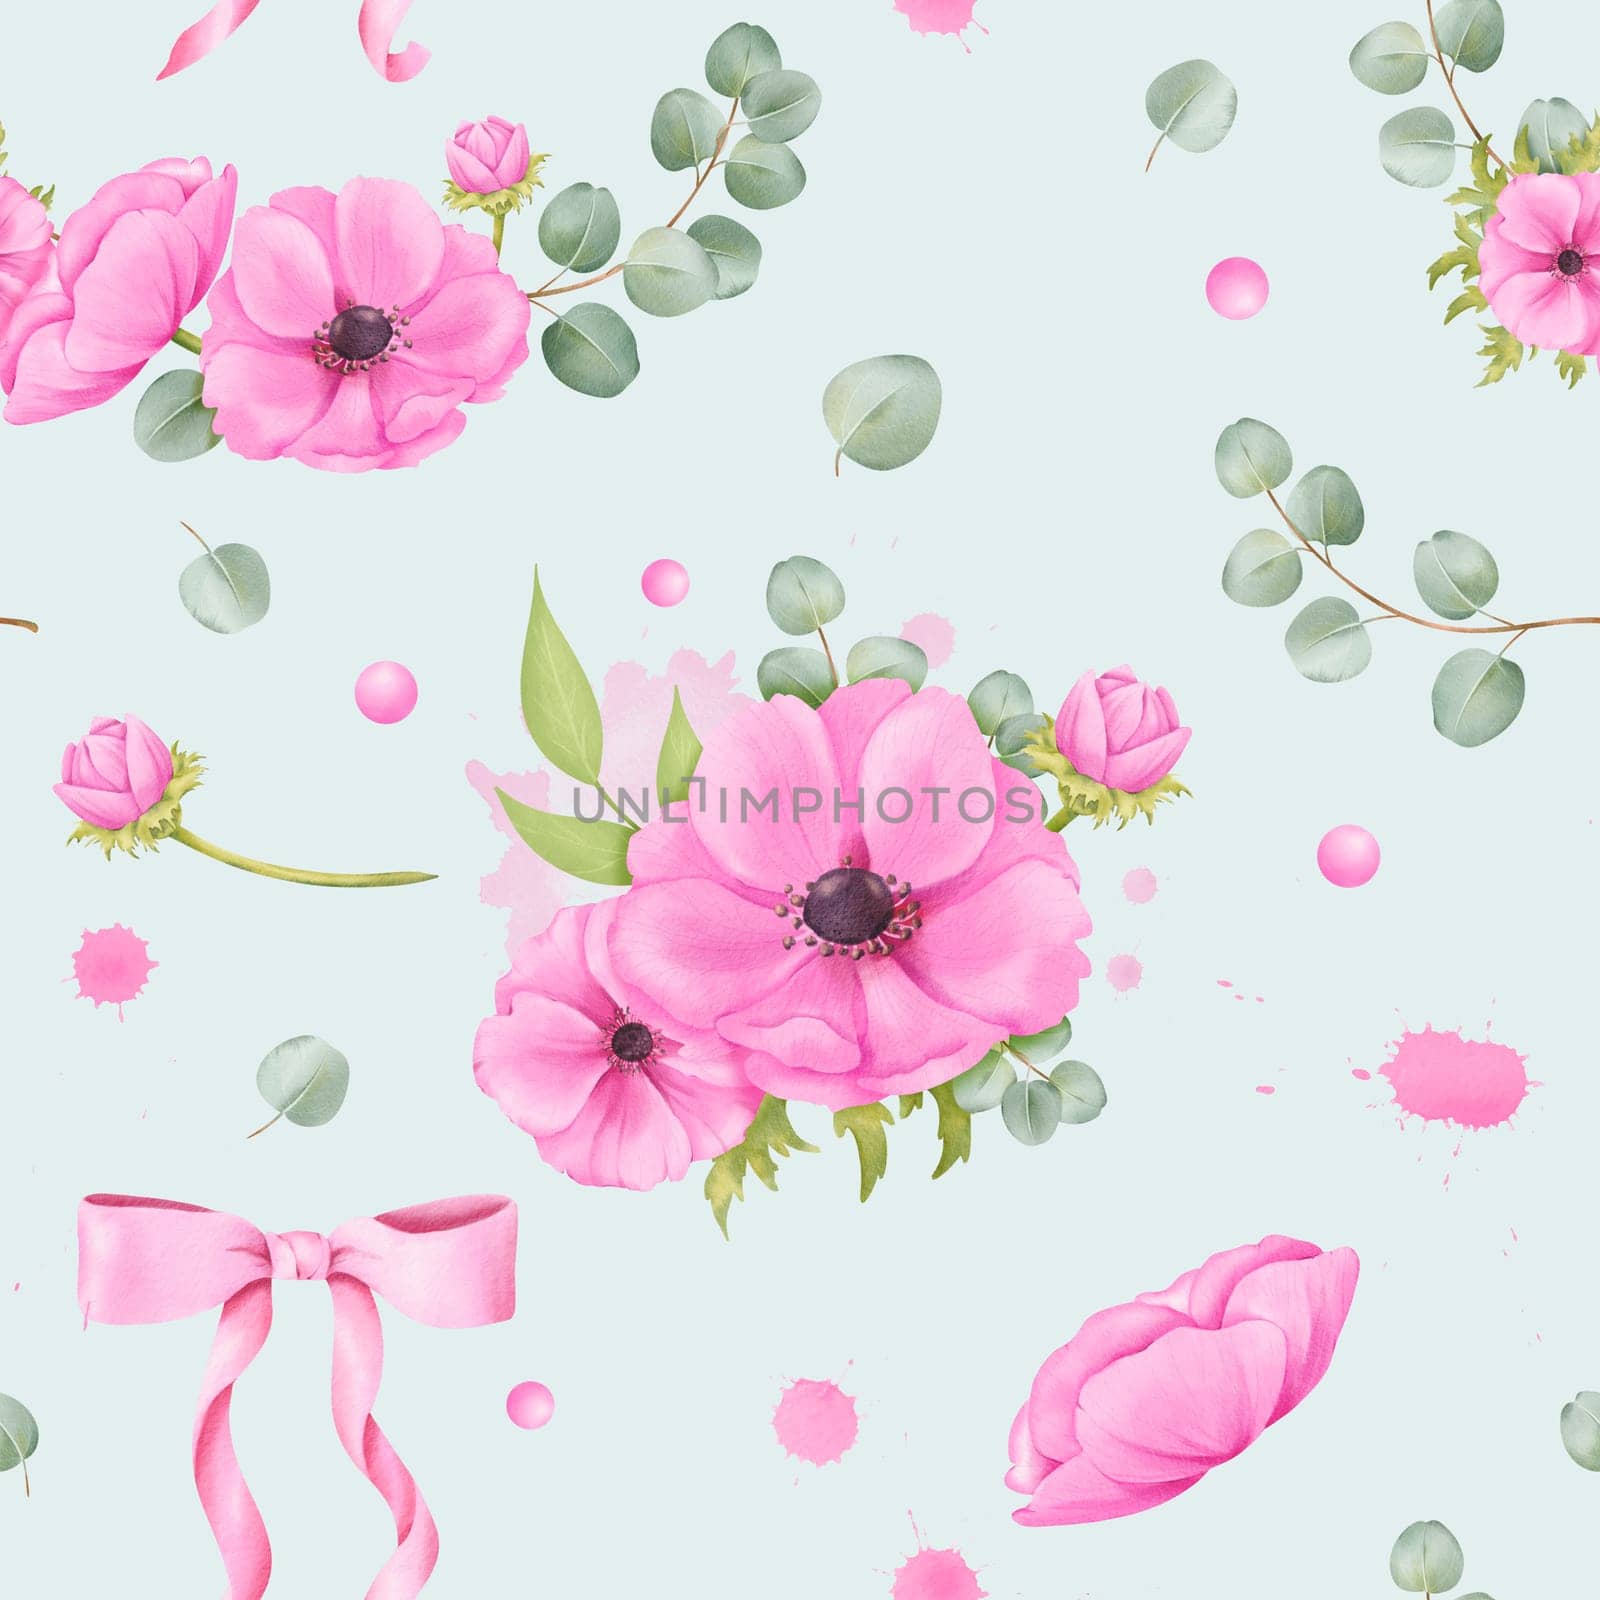 Seamless design adorned with watercolor floral elements. pink anemones, silk ribbons, splatters, eucalyptus foliage, and sparkling rhinestones. for wallpapers, fabric prints, crafting projects by Art_Mari_Ka